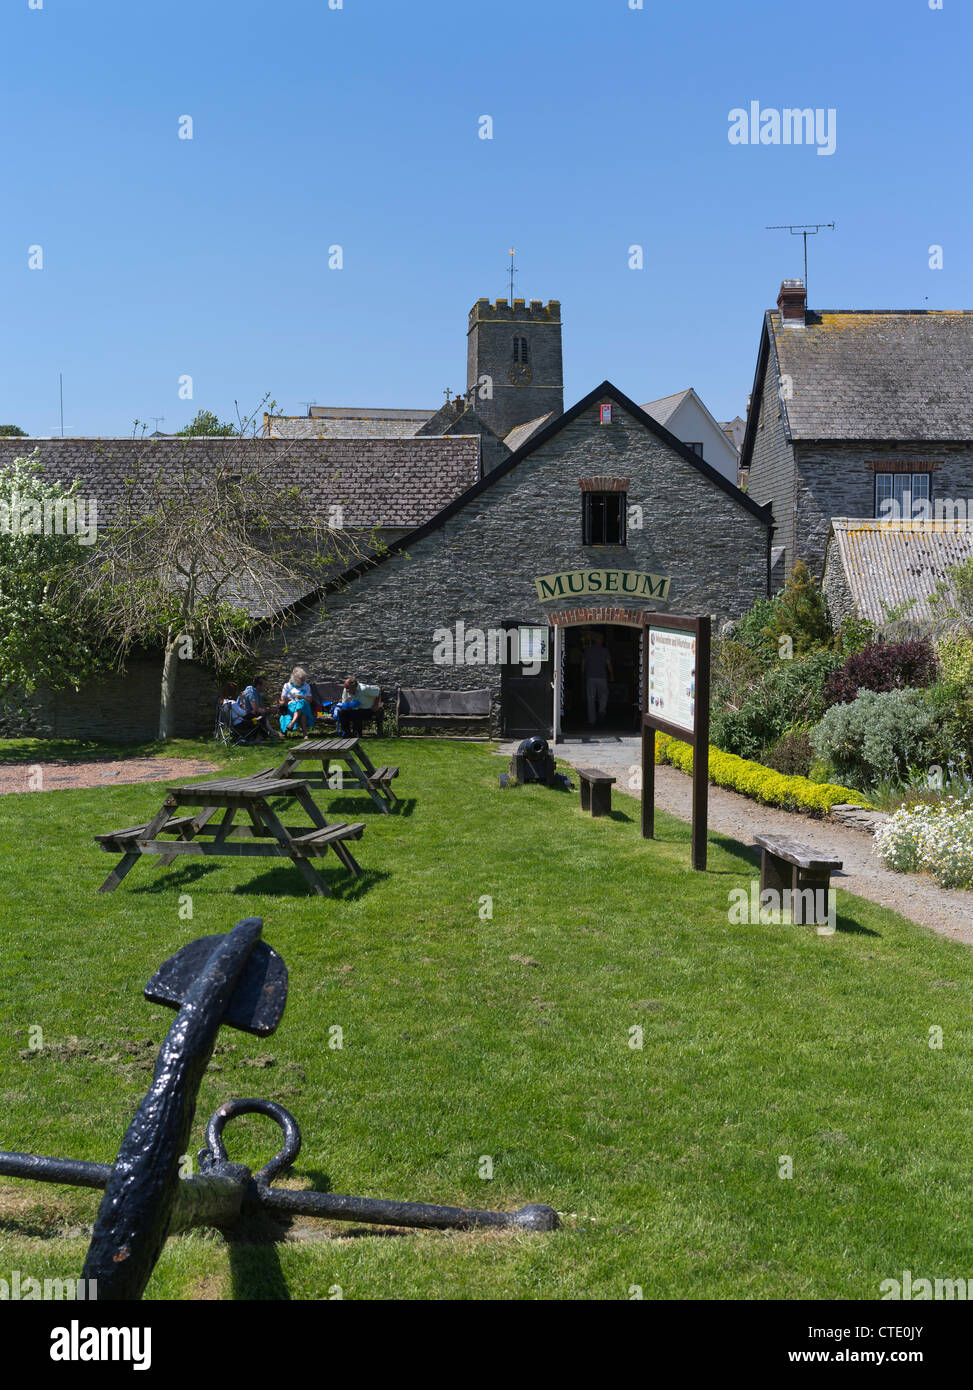 dh National trust museum MORTEHOE DEVON Tourist sitting outside museum building Heritage Centre visitors holiday tourists uk Stock Photo